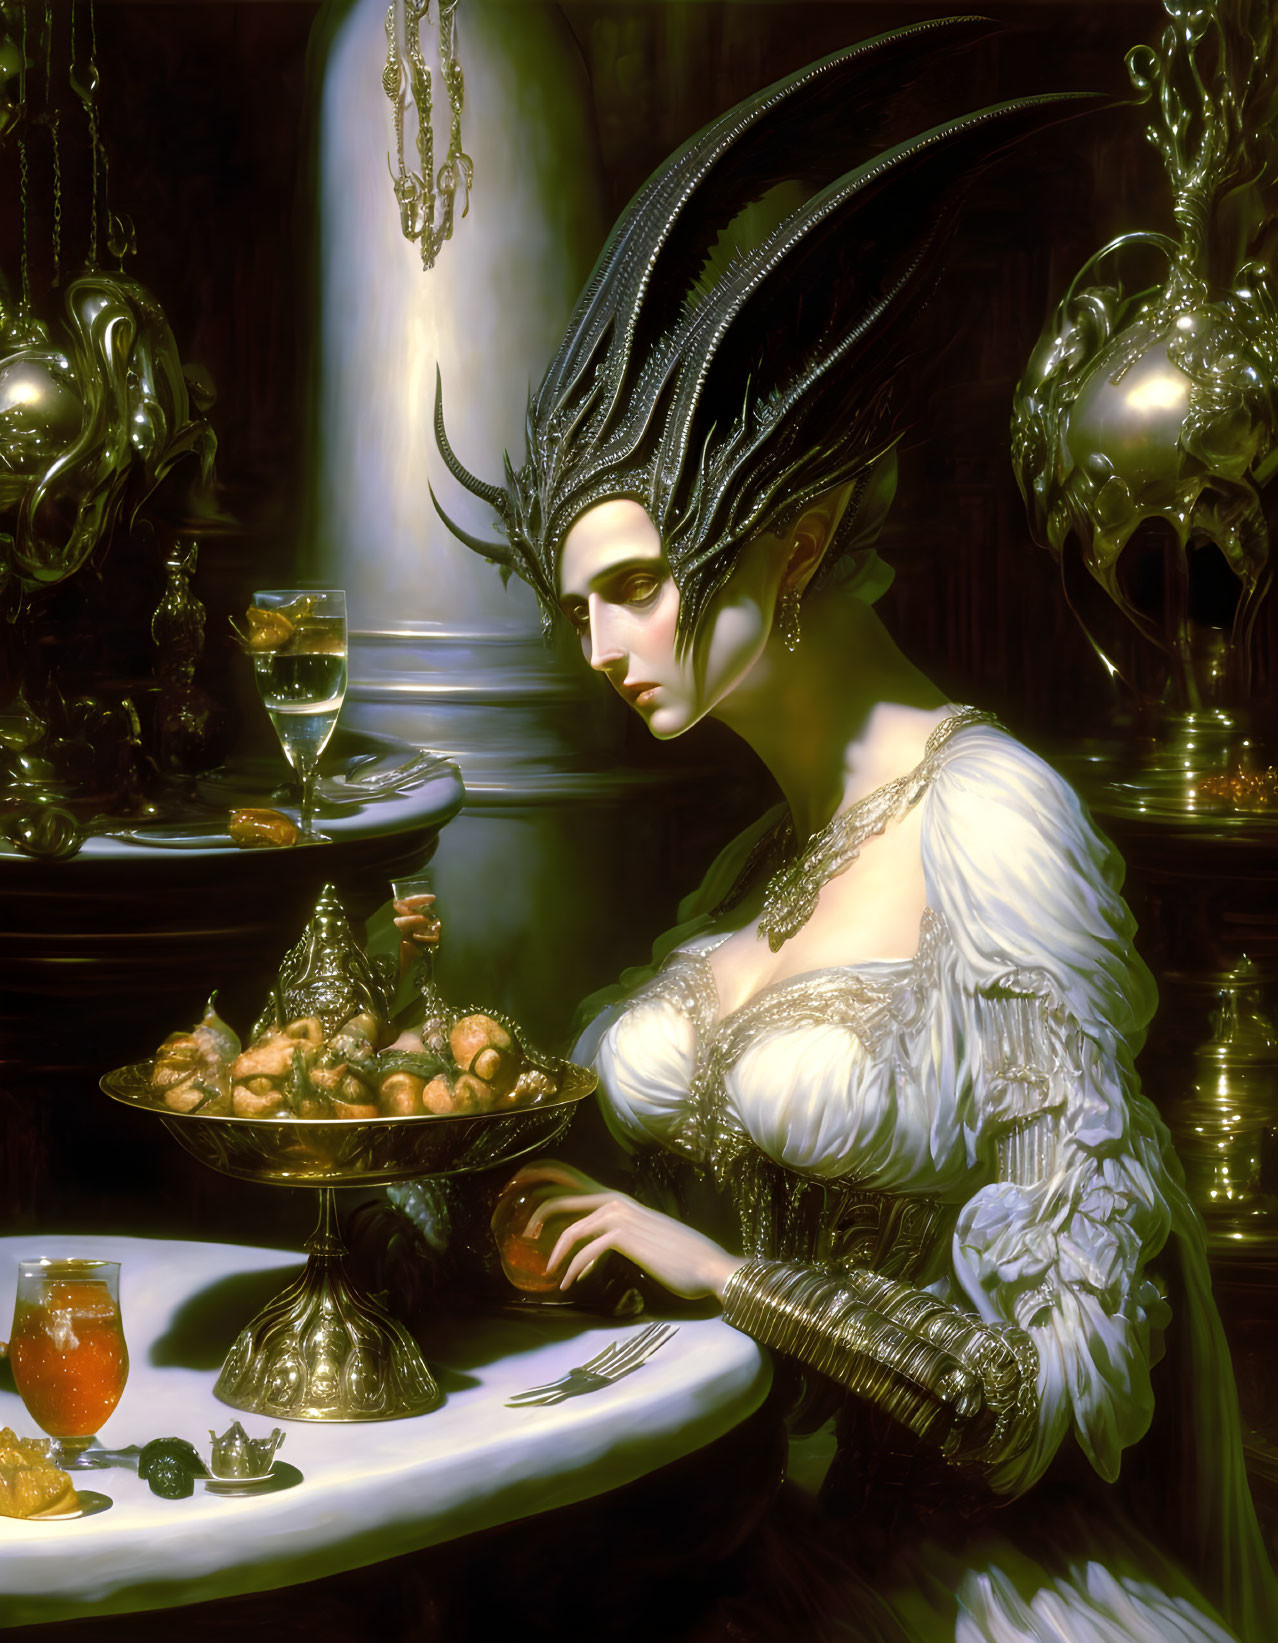 Regal woman with intricate headdress at lavish table